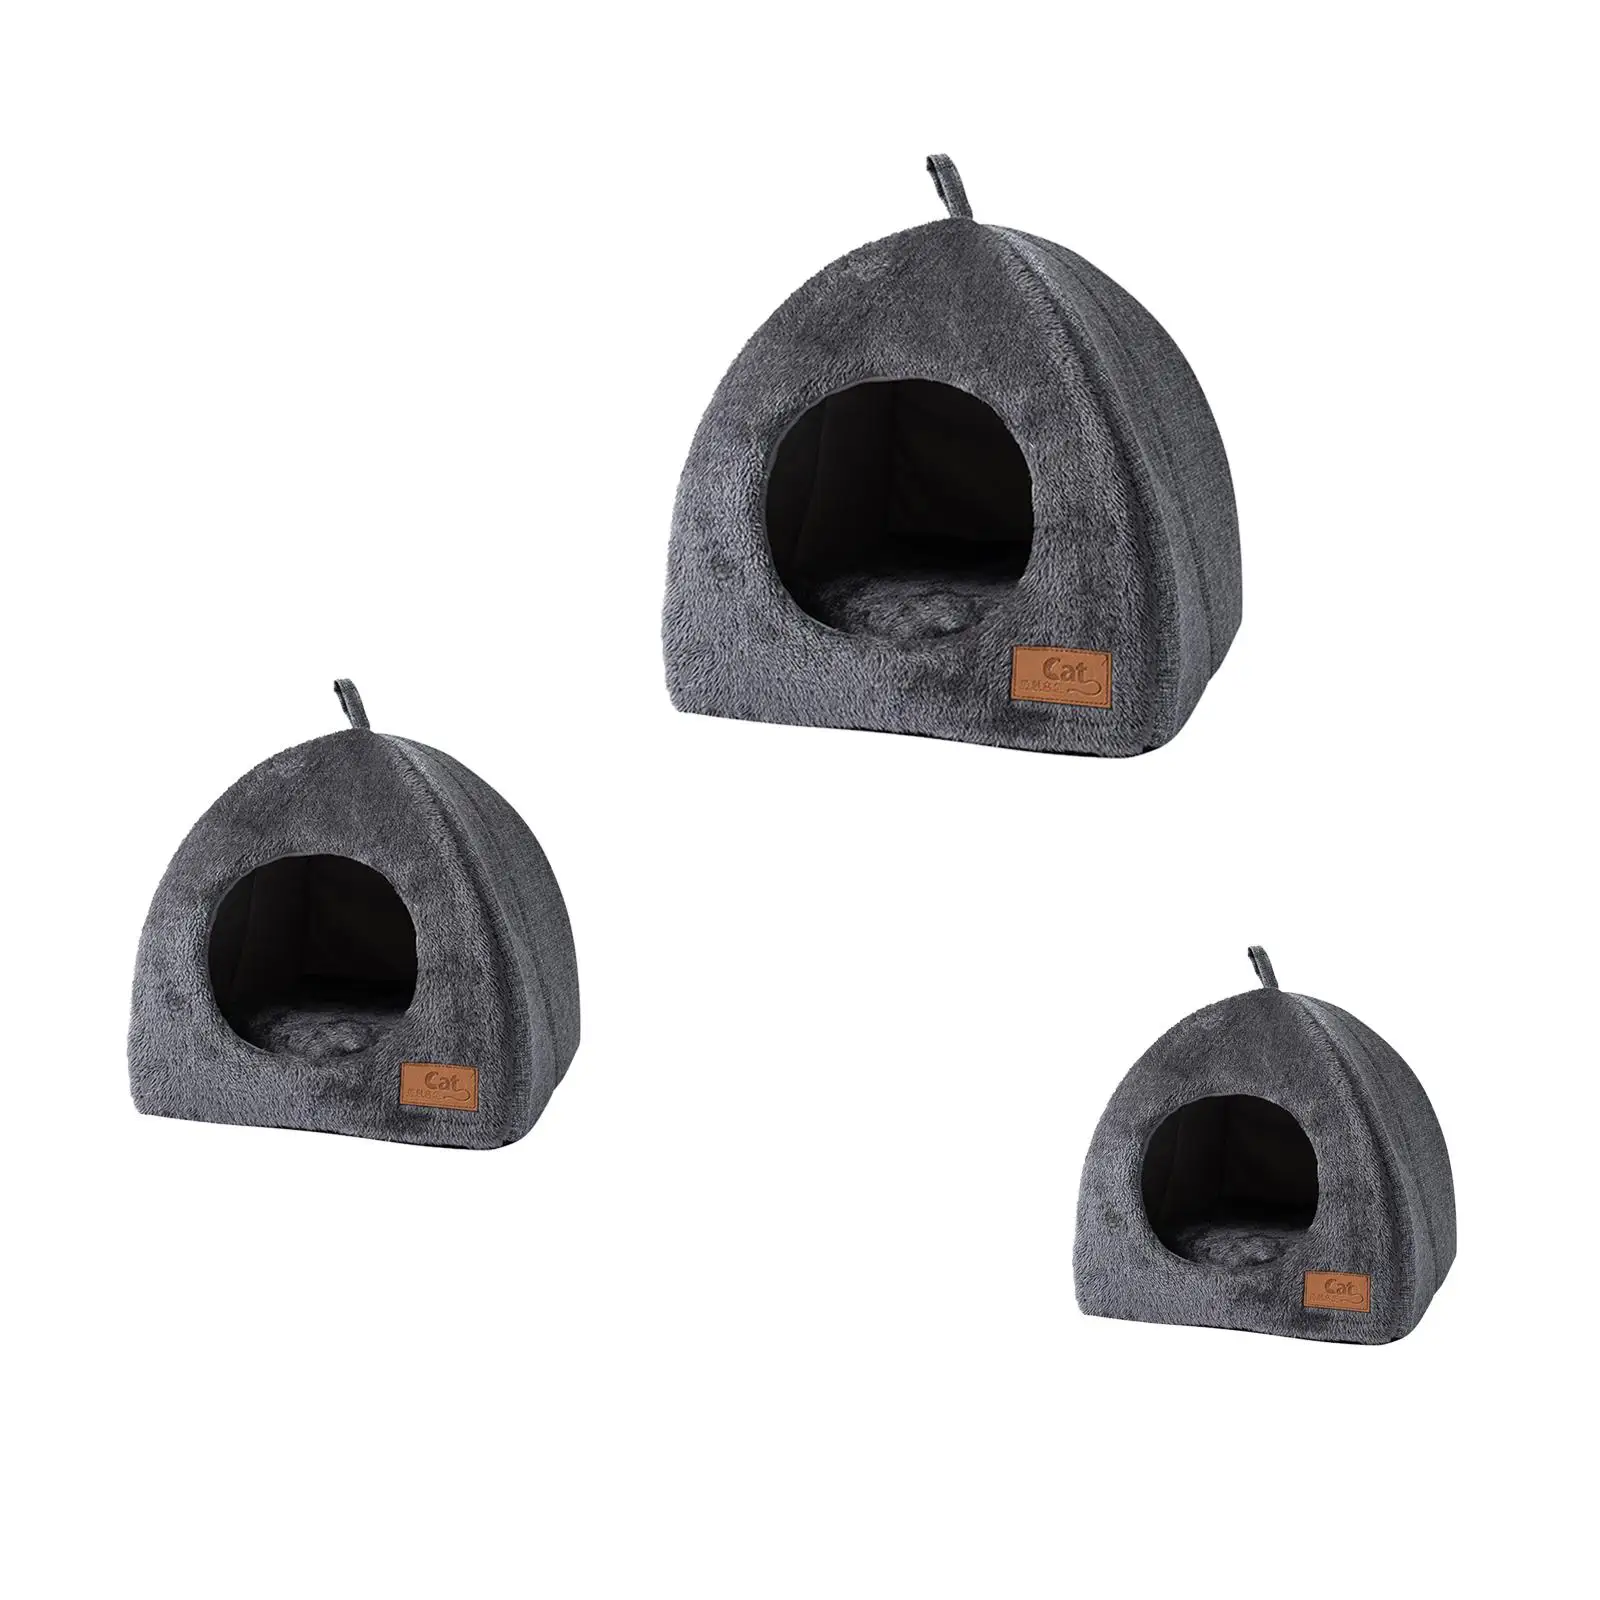 Portable Pad Nest Warm Basket Soft Cushion Sleeping Bed Thick Puppy Puppy Mat Kennel Pad for Indoor Cats Cats Winter Pet Dog